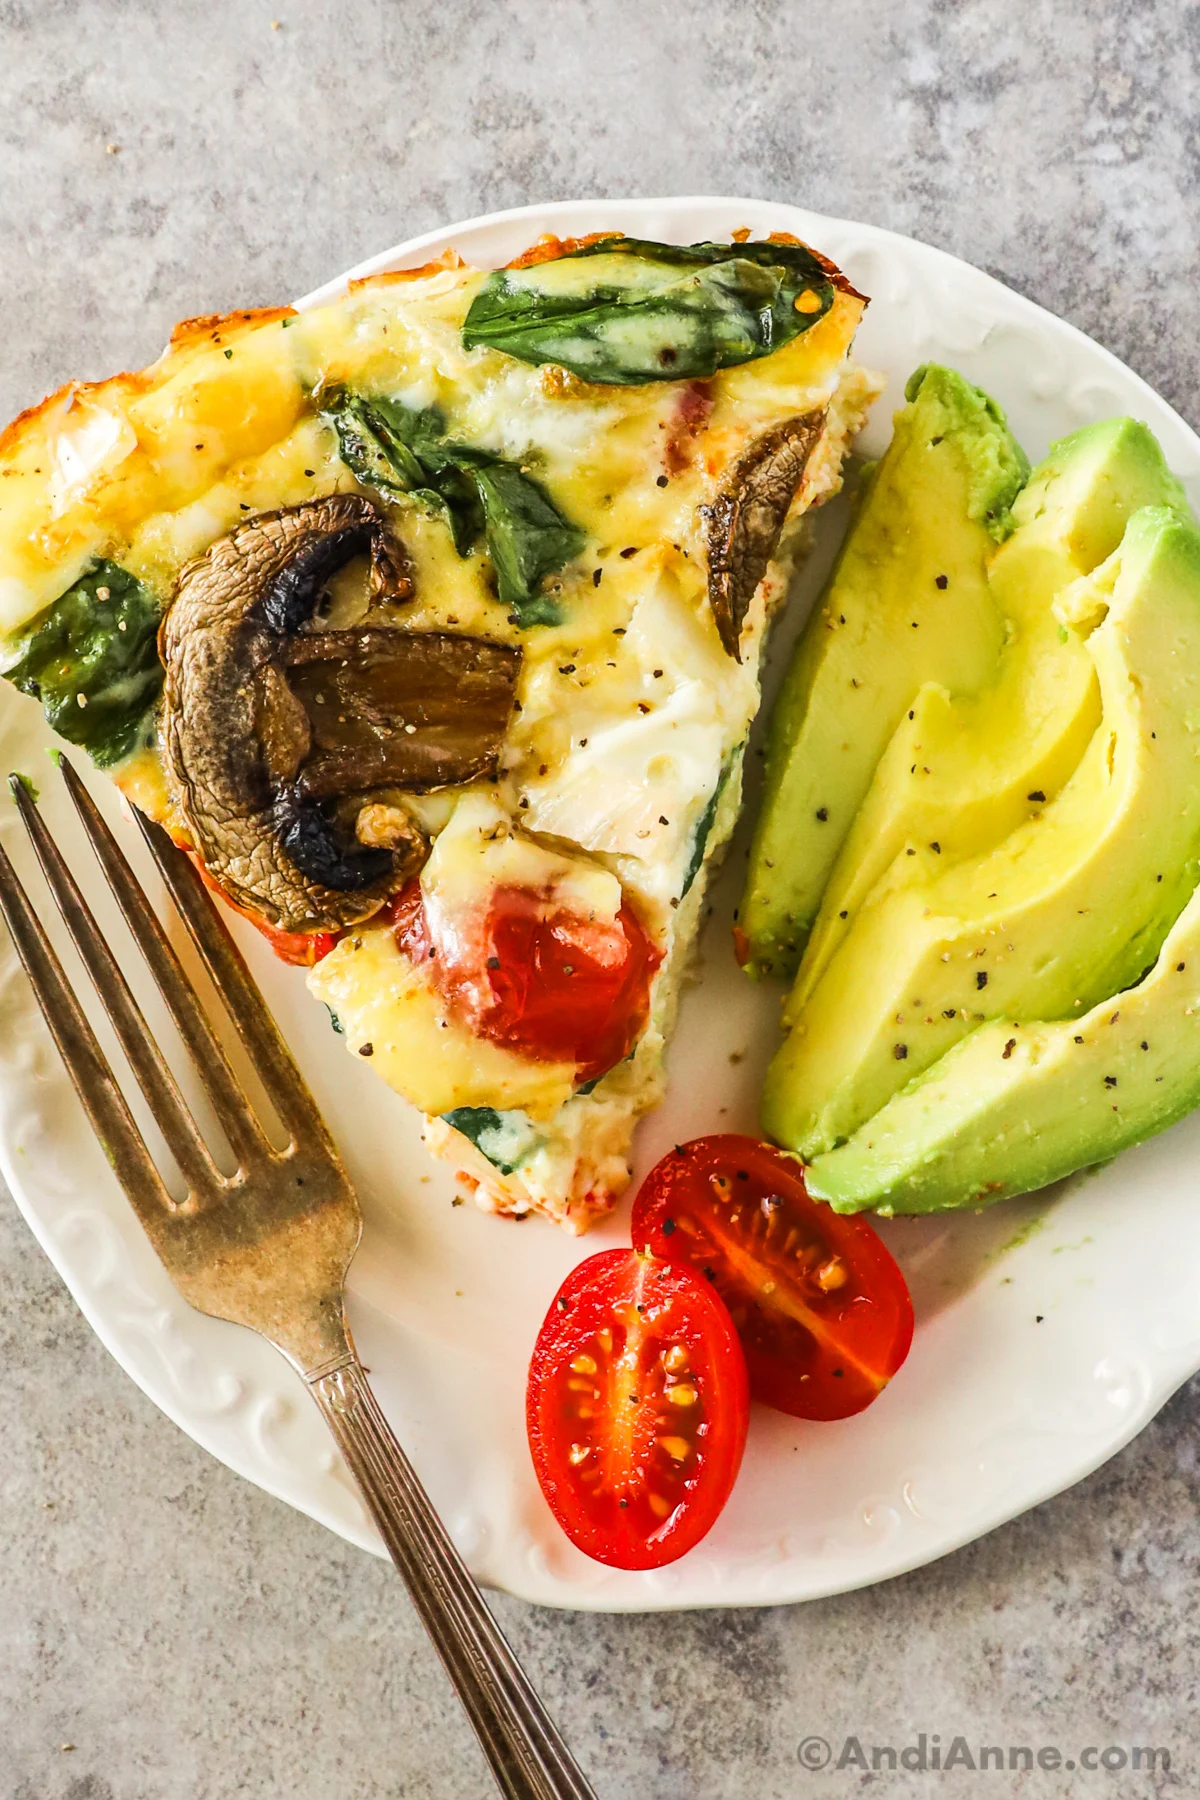 A slice of vegetable quiche, with slices of avocado, grape tomato and a fork